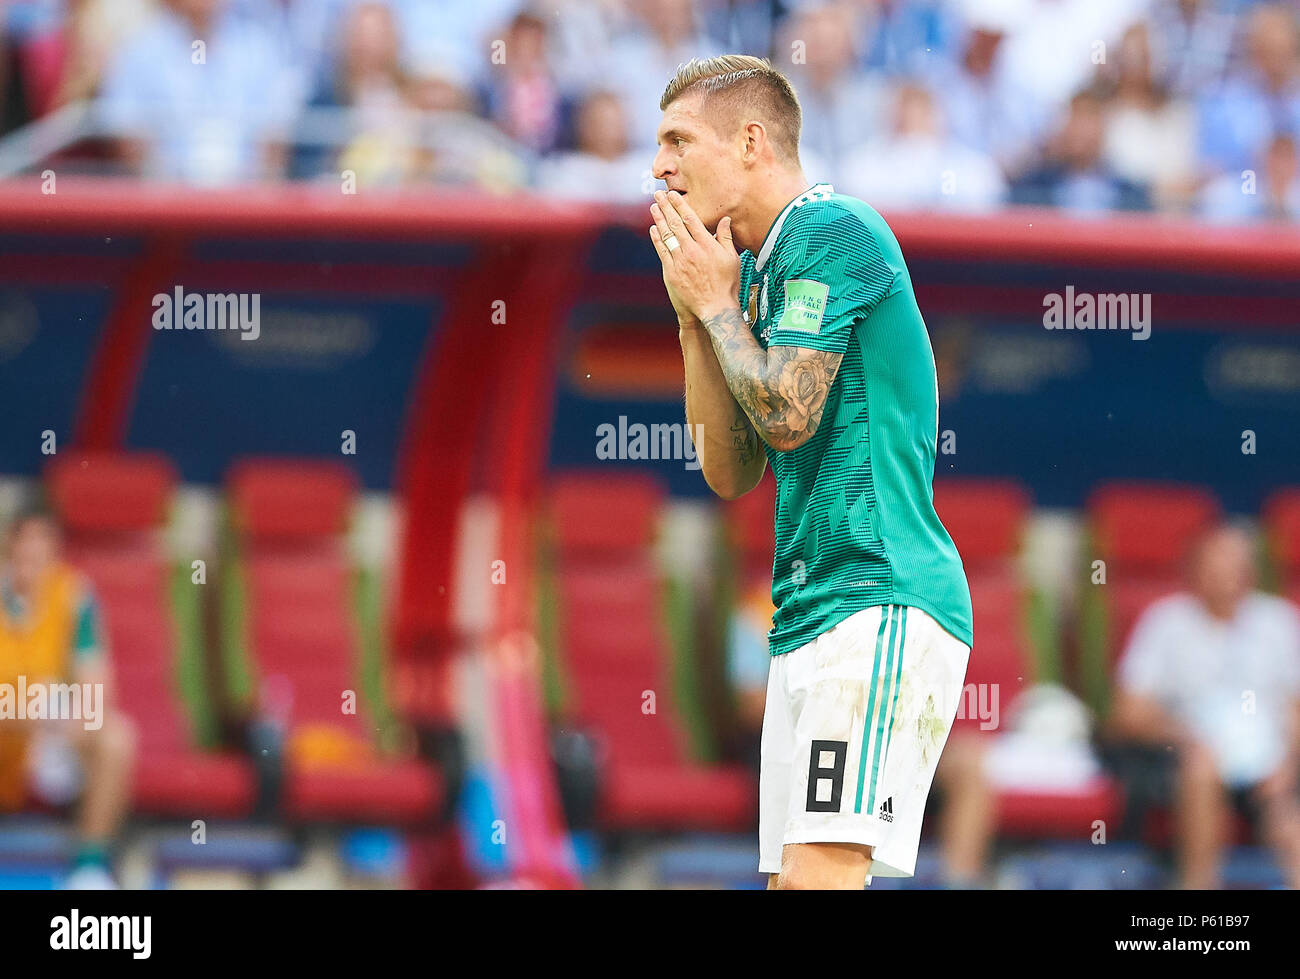 Kazan, Russia. 27th Jun, 2018. Germany - South Korea, Soccer, Kazan, June 27, 2018 Toni KROOS, DFB 8 sad, disappointed, angry, Emotions, disappointment, frustration, frustrated, sadness, desperate, despair,  GERMANY - KOREA REPUBLIC 0-2 FIFA WORLD CUP 2018 RUSSIA, Group F, Season 2018/2019,  June 27, 2018  Stadium K a z a n - A r e n a in Kazan, Russia. © Peter Schatz / Alamy Live News Stock Photo